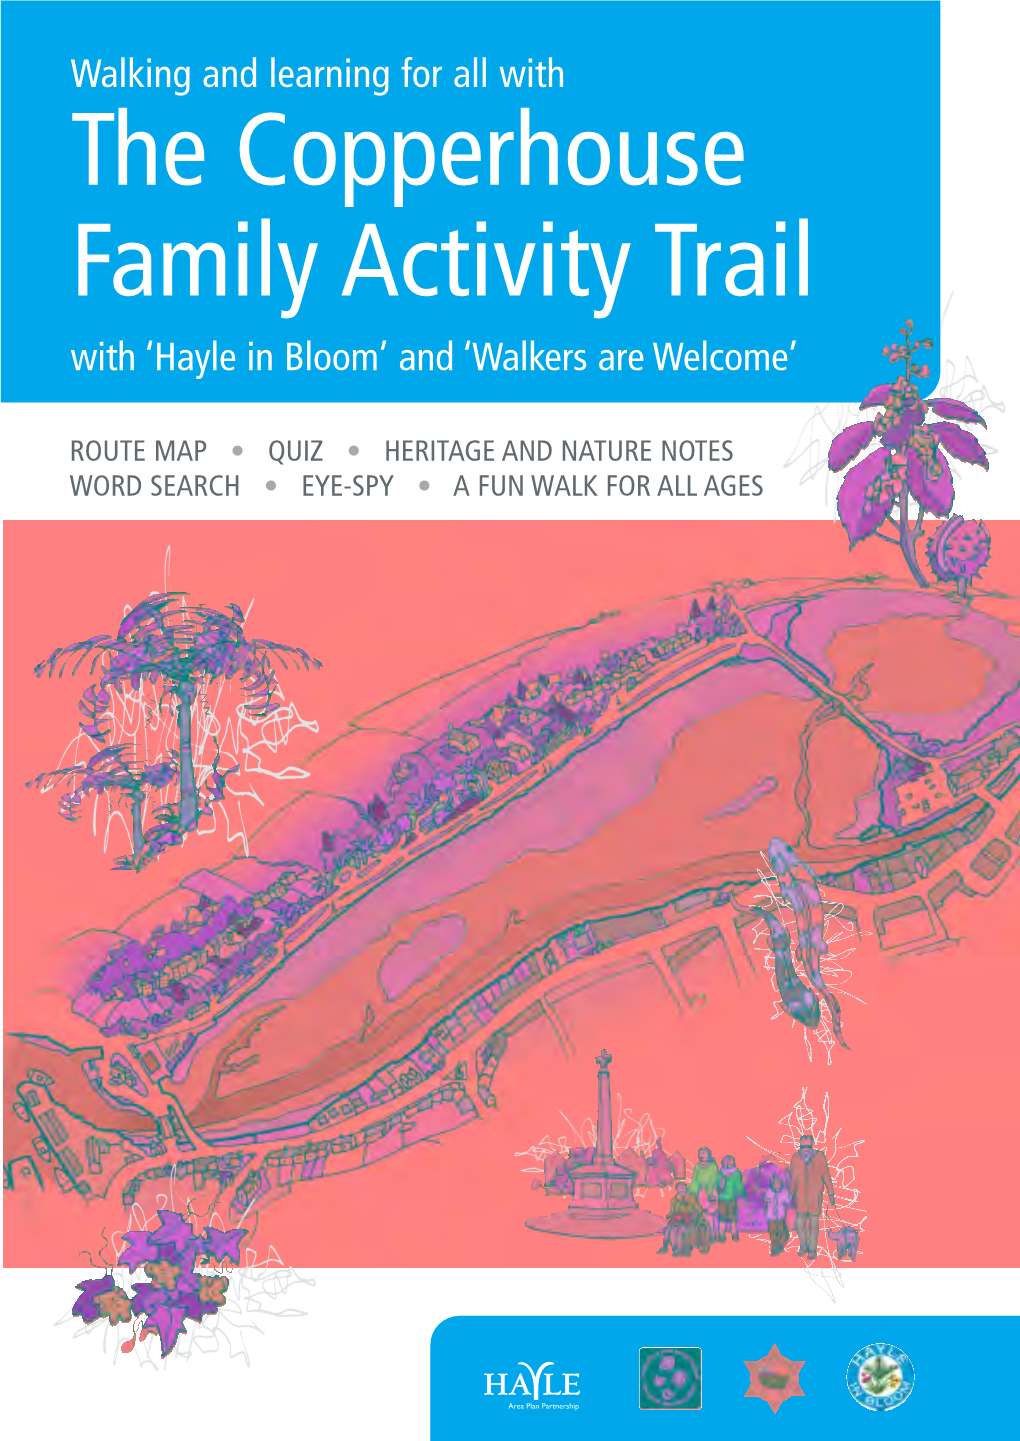 The Copperhouse Family Activity Trail with ‘Hayle in Bloom’ and ‘Walkers Are Welcome’